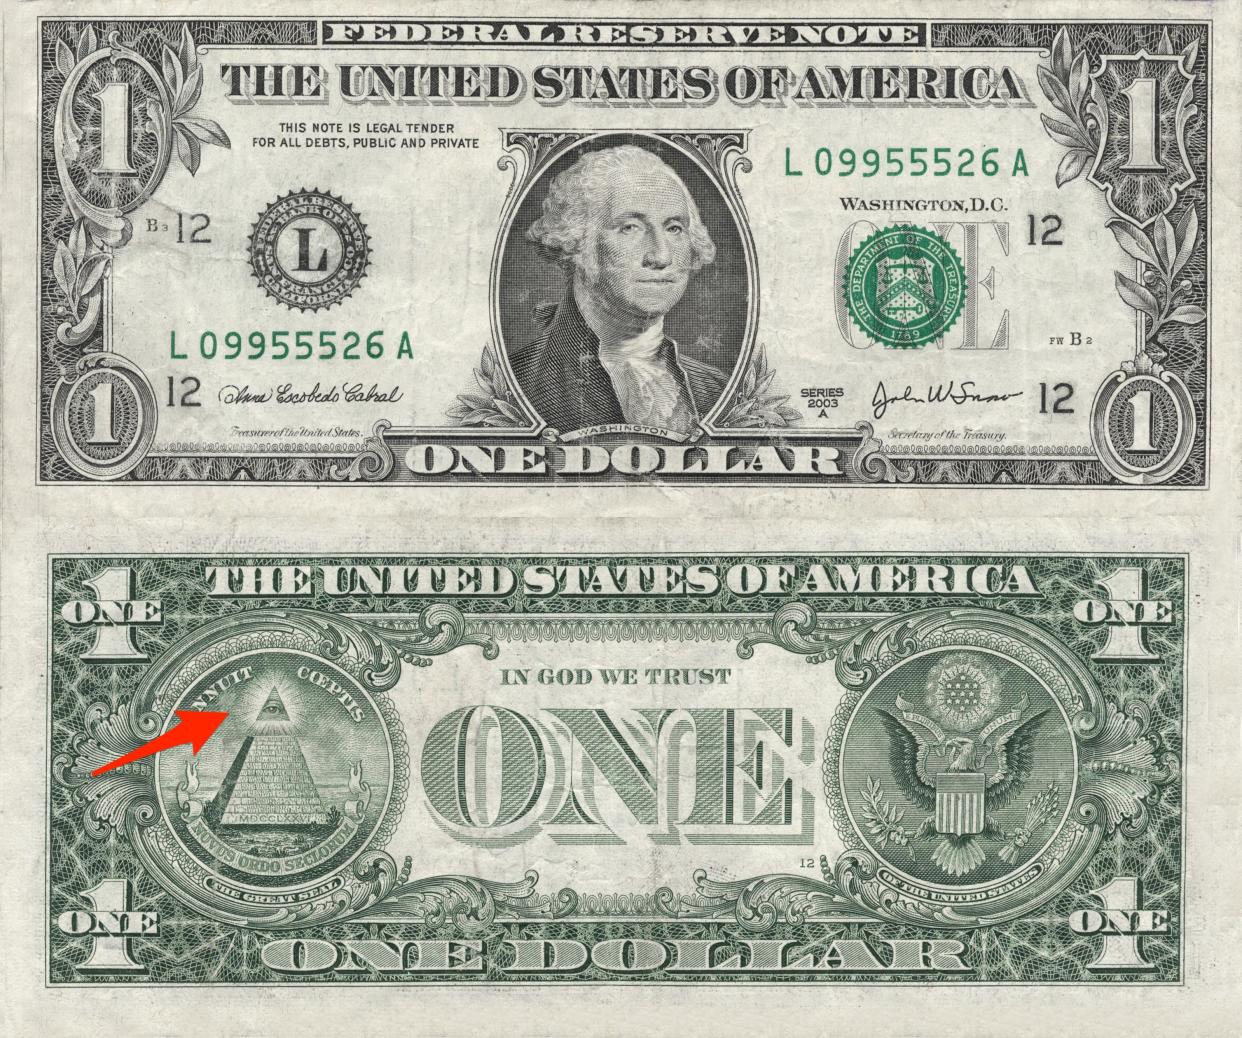 An image of an American one dollar bill with a red arrow pointing to the pyramid with an eye on top of it.